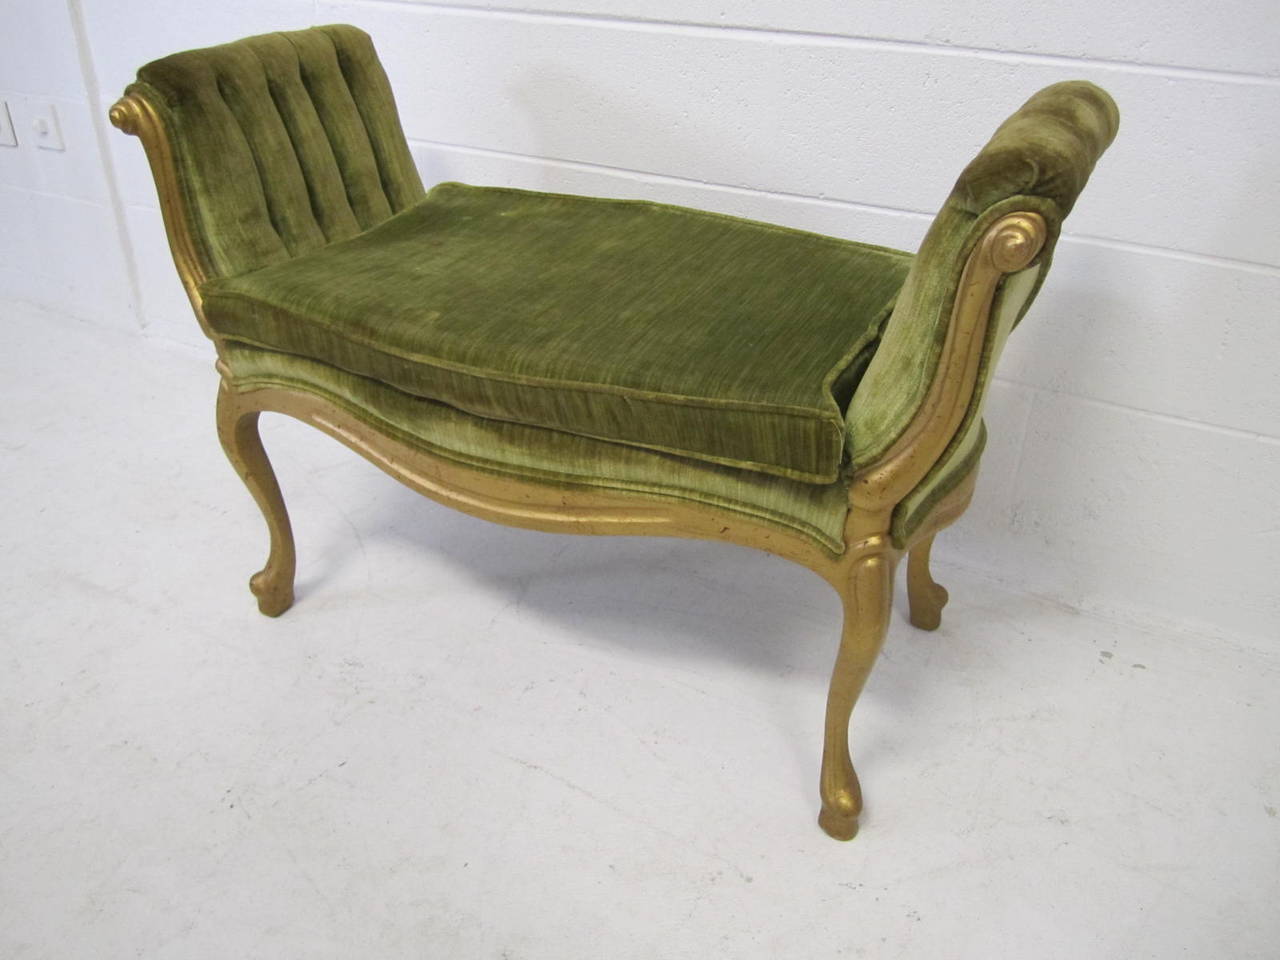 Lovely little hollywood regency style gold cabriolet leg bench.  This piece was reupholstered in the 70's with a green cotton velvet and still looks very nice.  Would be amazing in something new and fresh.  The painted gold carved wooden frame looks